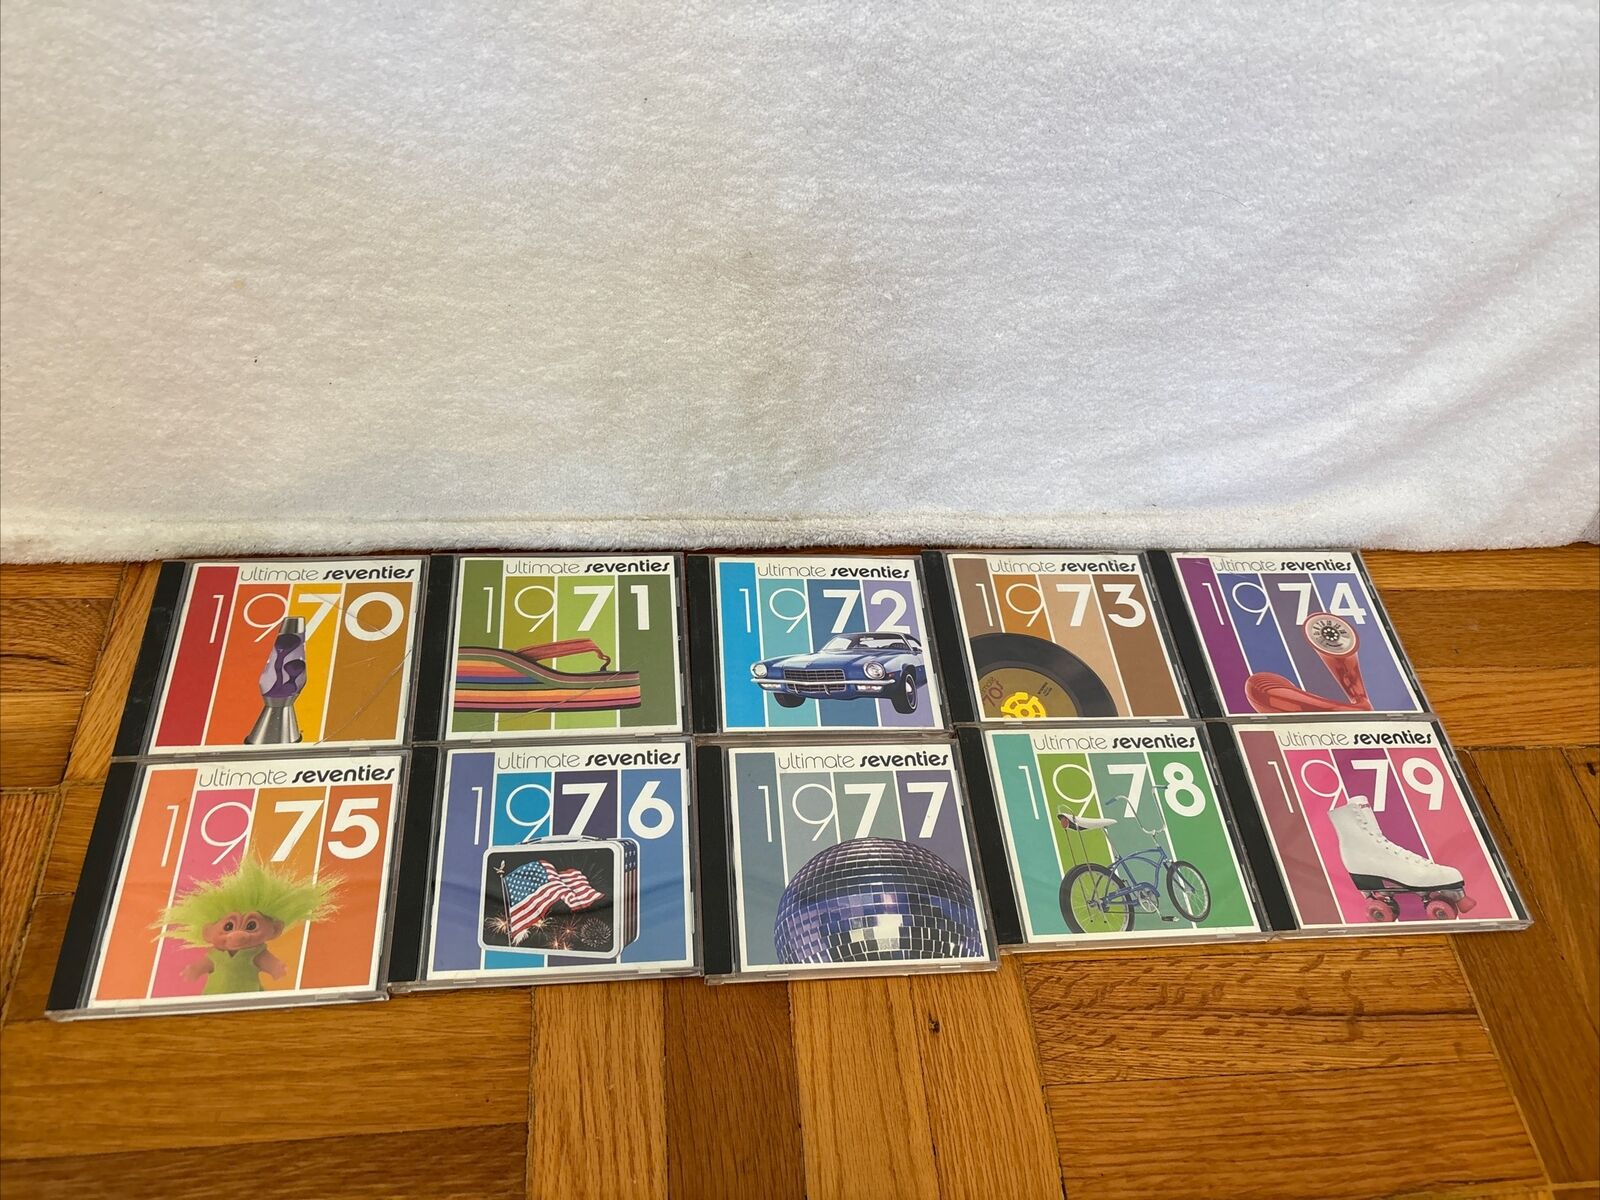 Time Life Ultimate Seventies 70s Complete 10 CD set 1970 - 1979 